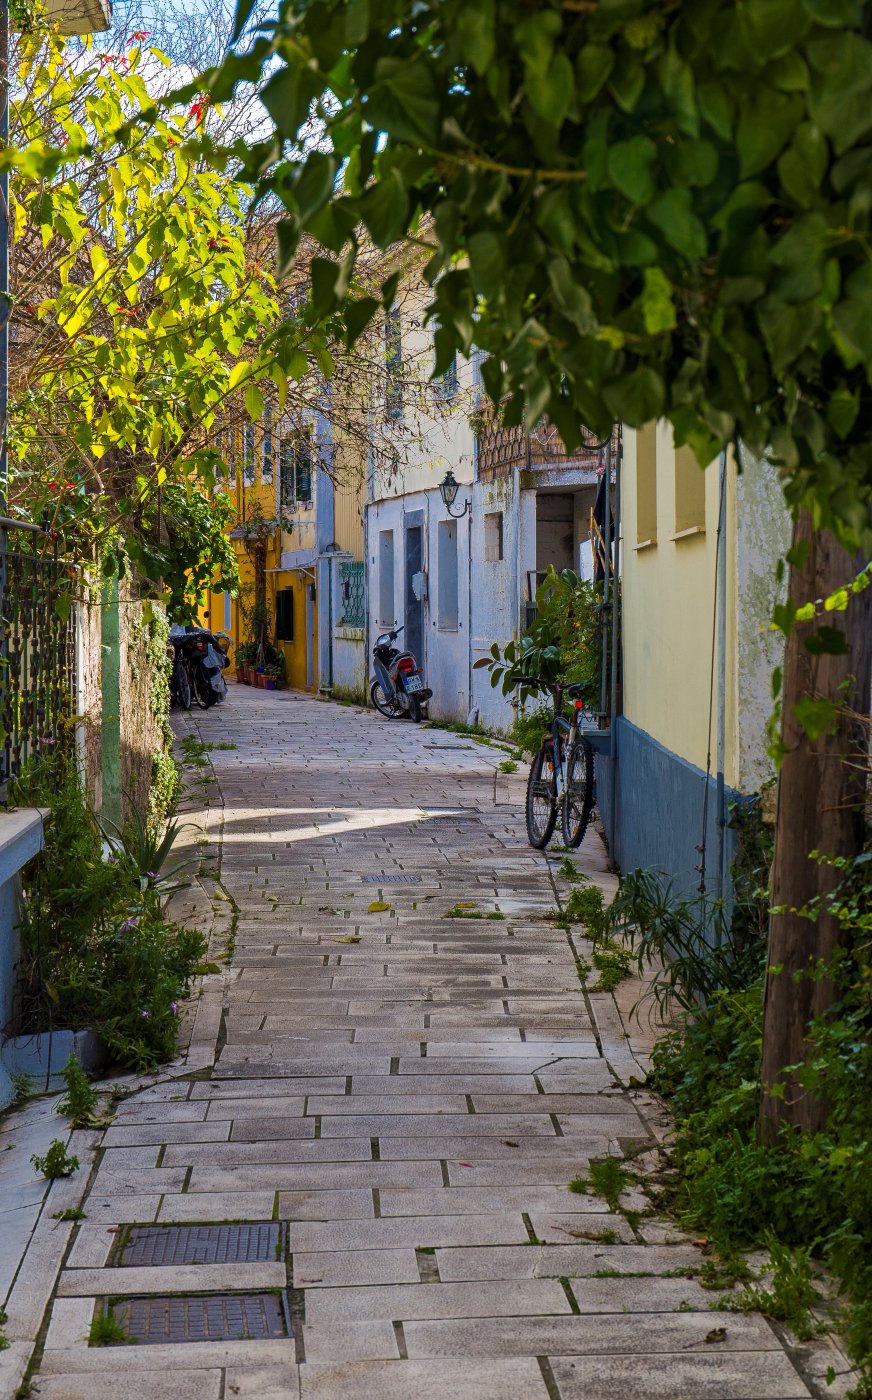 Side street in the old town of Lefkada. Photo by Andreas Thermos